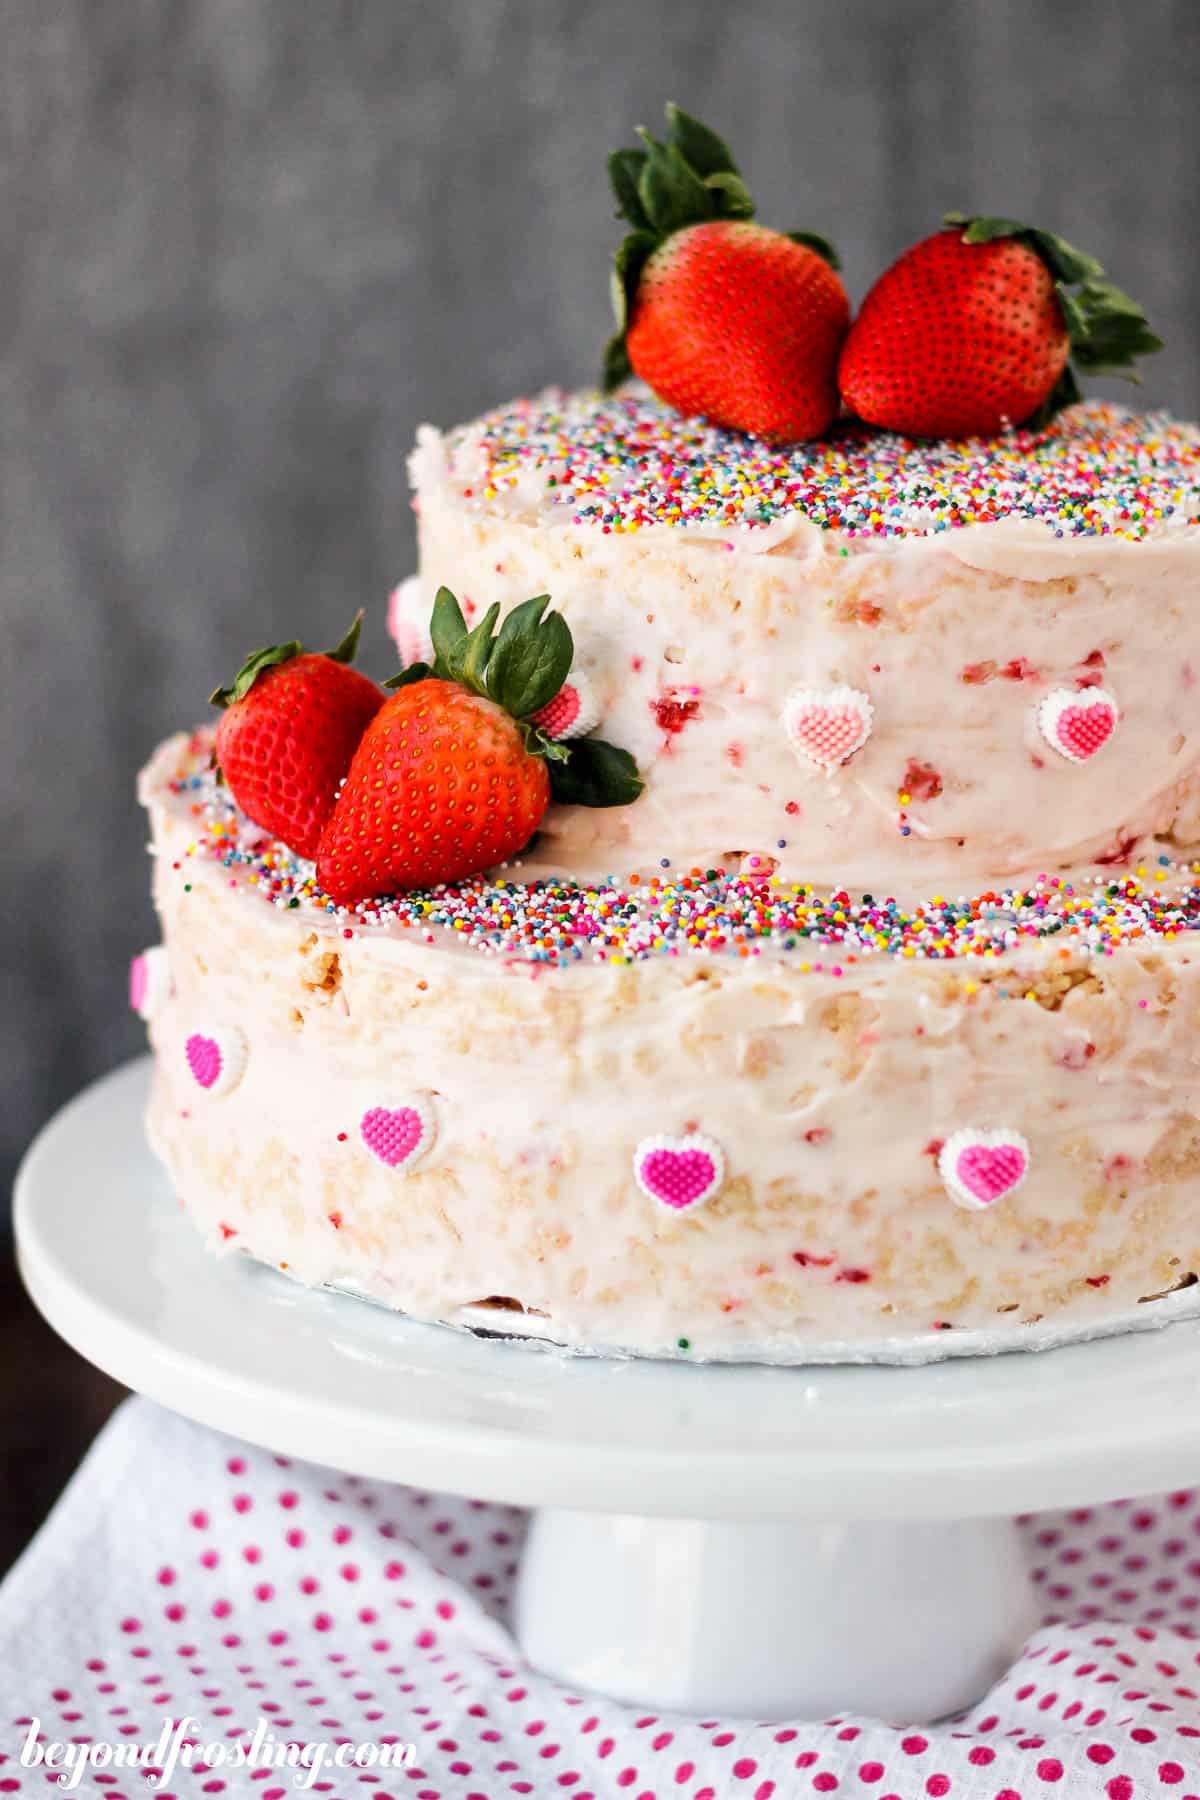 a strawberry rice krispie treat cake garnished with sprinkles and fresh strawberries on a cake stand